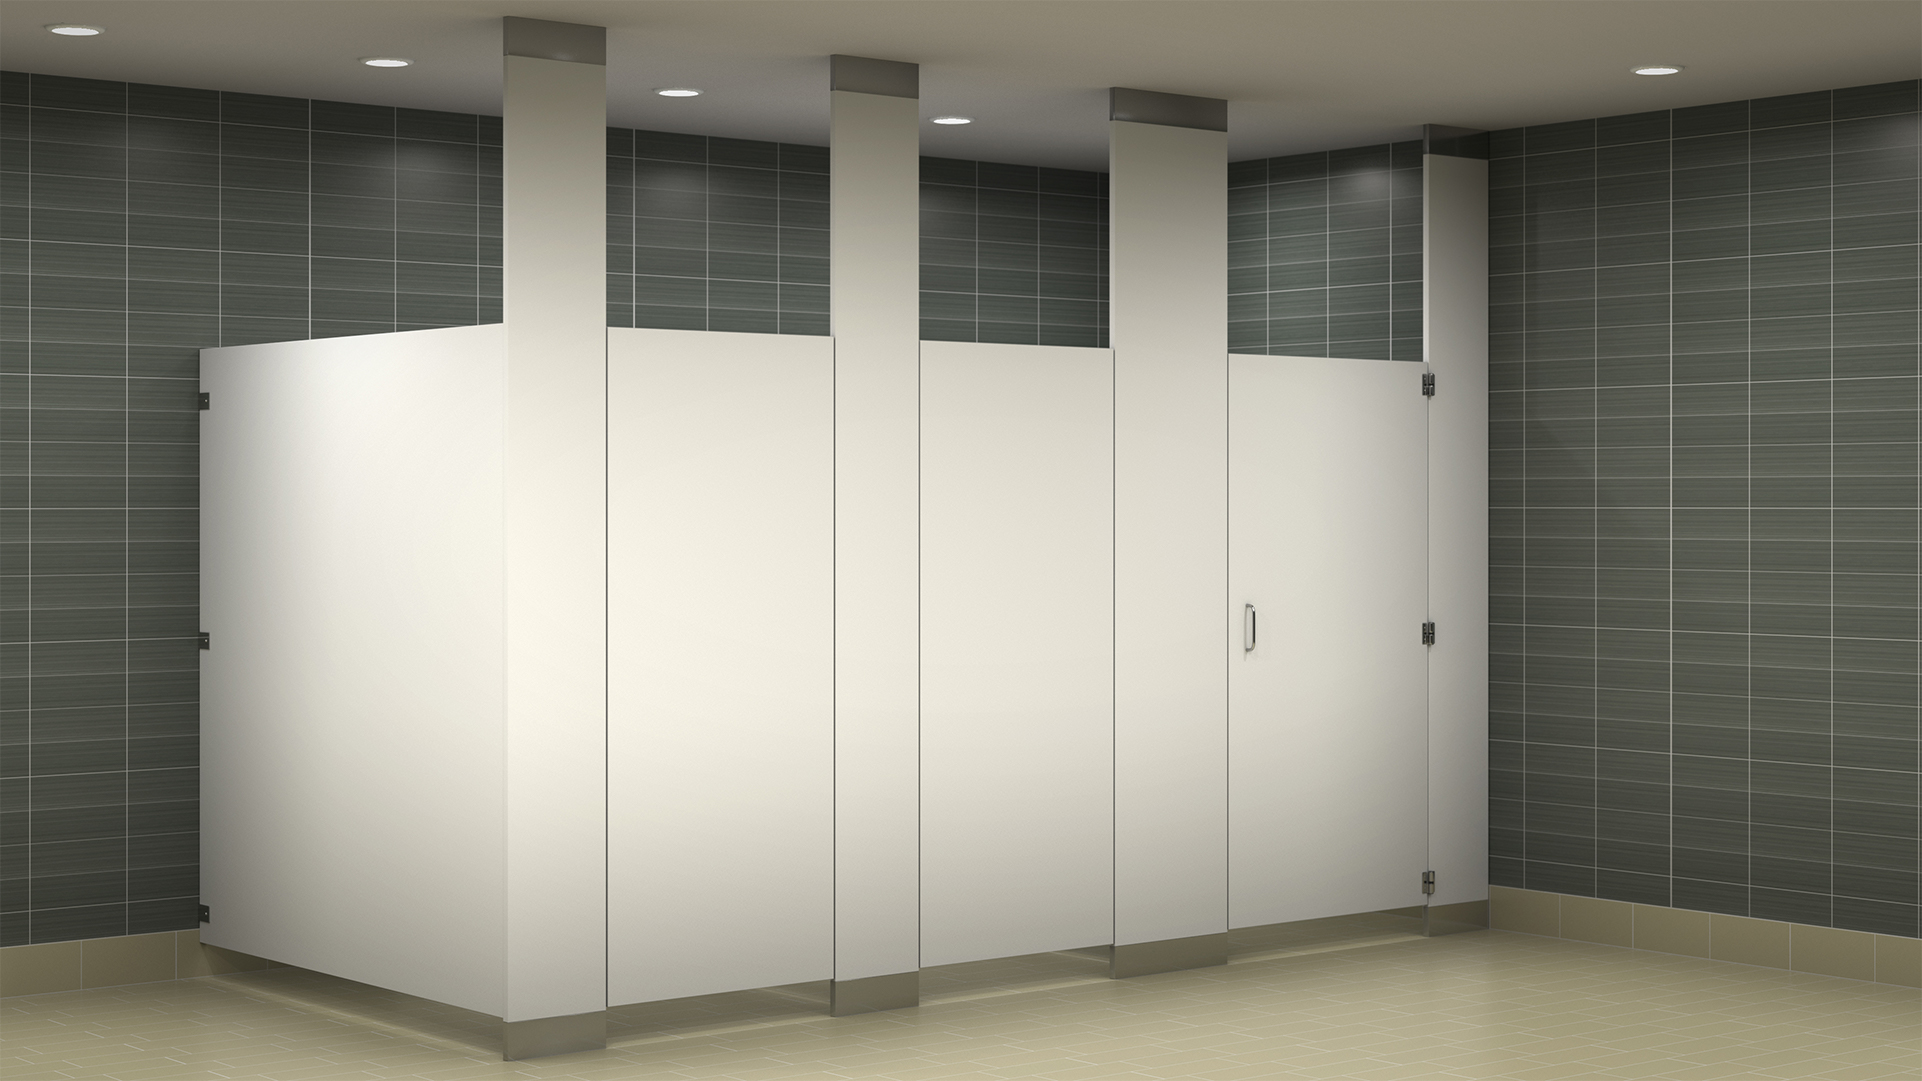 Bobrick SierraSeries Floor to ceiling Toilet Partitions sold by J. Laurenzo Specialties